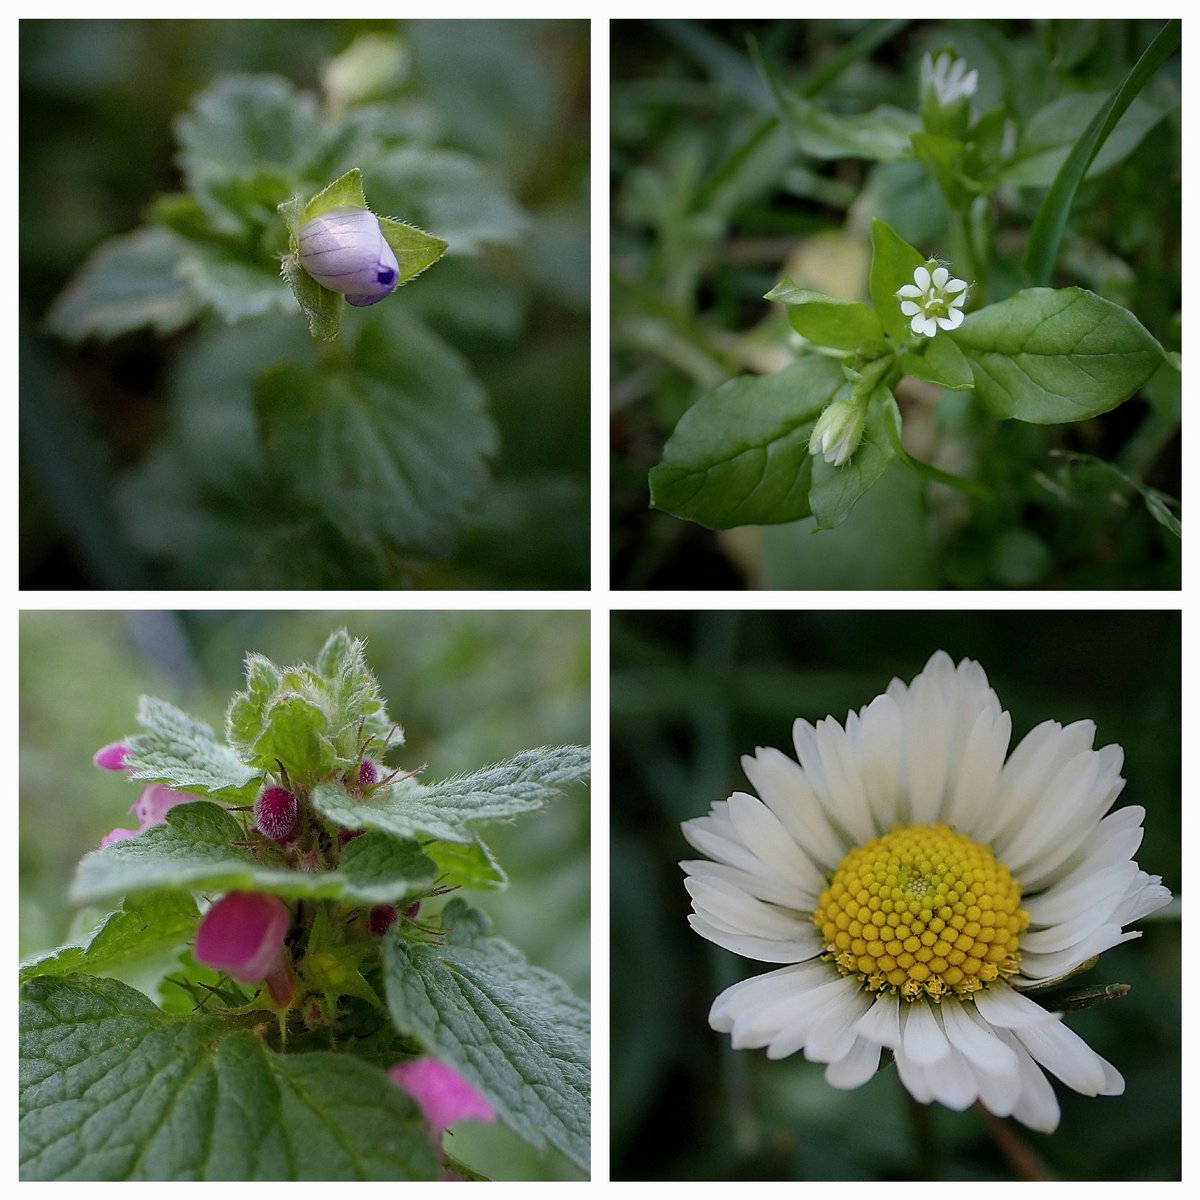 Four of the gorgeous little wildflowers currently enjoying life at the allotment 🥰🌼 so much colour and beauty in the midst of winter, if we look closely! 💛💜🤍💚 #wildflowerhour #NatureBeauty #sundayvibes #flowerphotography #flowers #naturelovers #gardening #nature #Cambridge